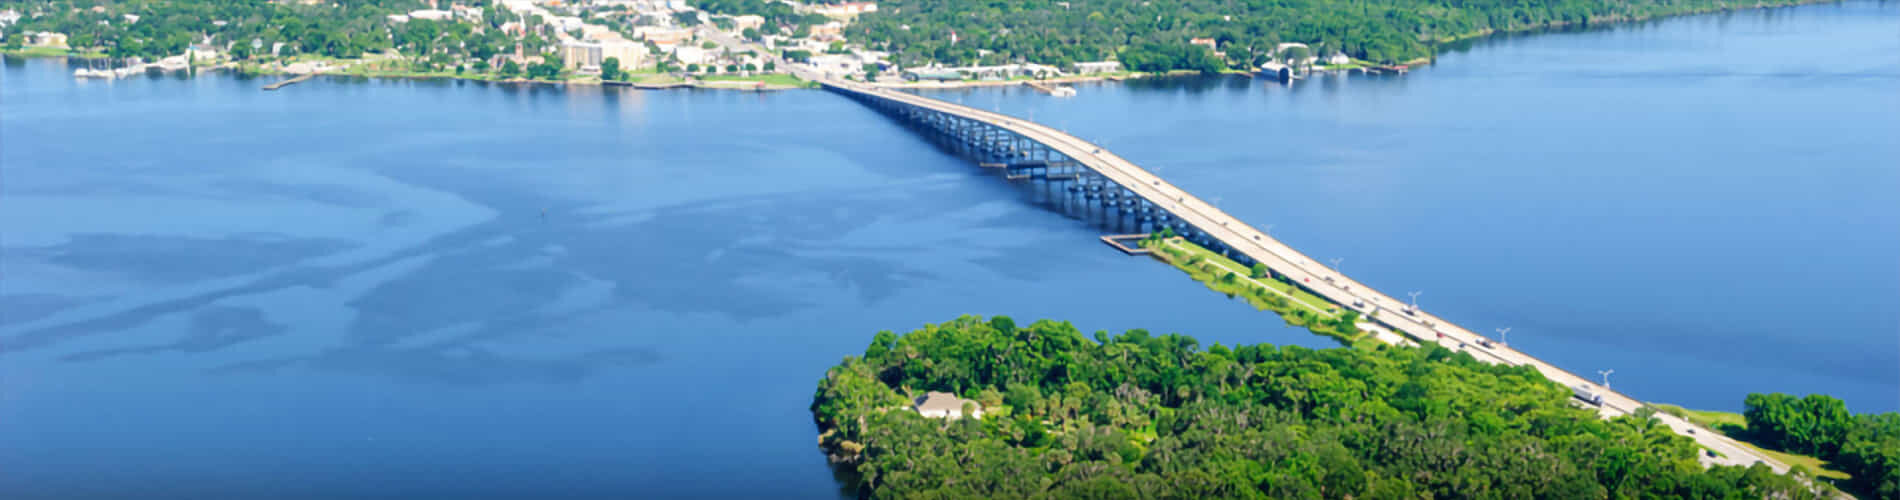 Aerial view of a bridge over bright blue water.